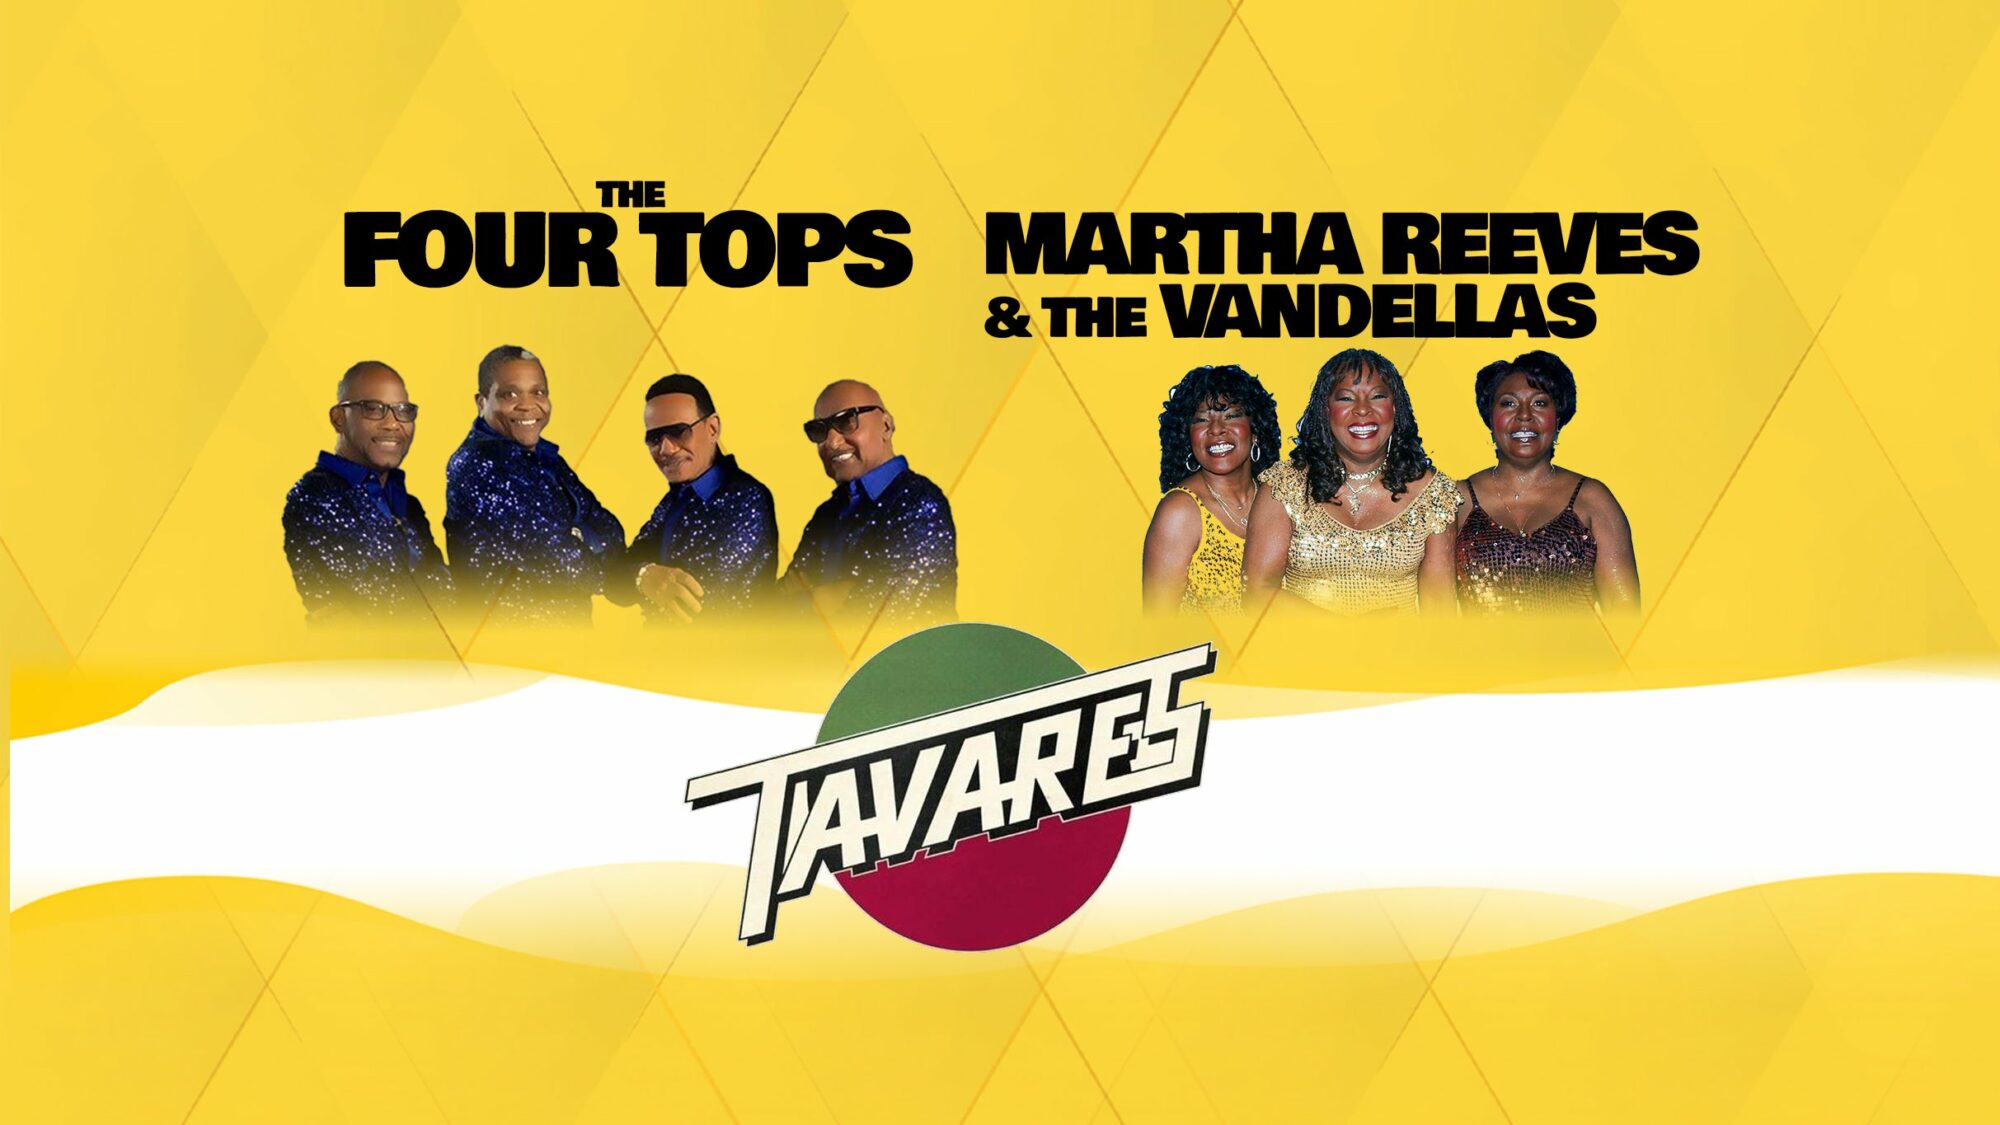 Image name The Four Tops Tavares Martha Reeves the Vandellas at Connexin Live Hull the 10 image from the post Events in Yorkshire.com.